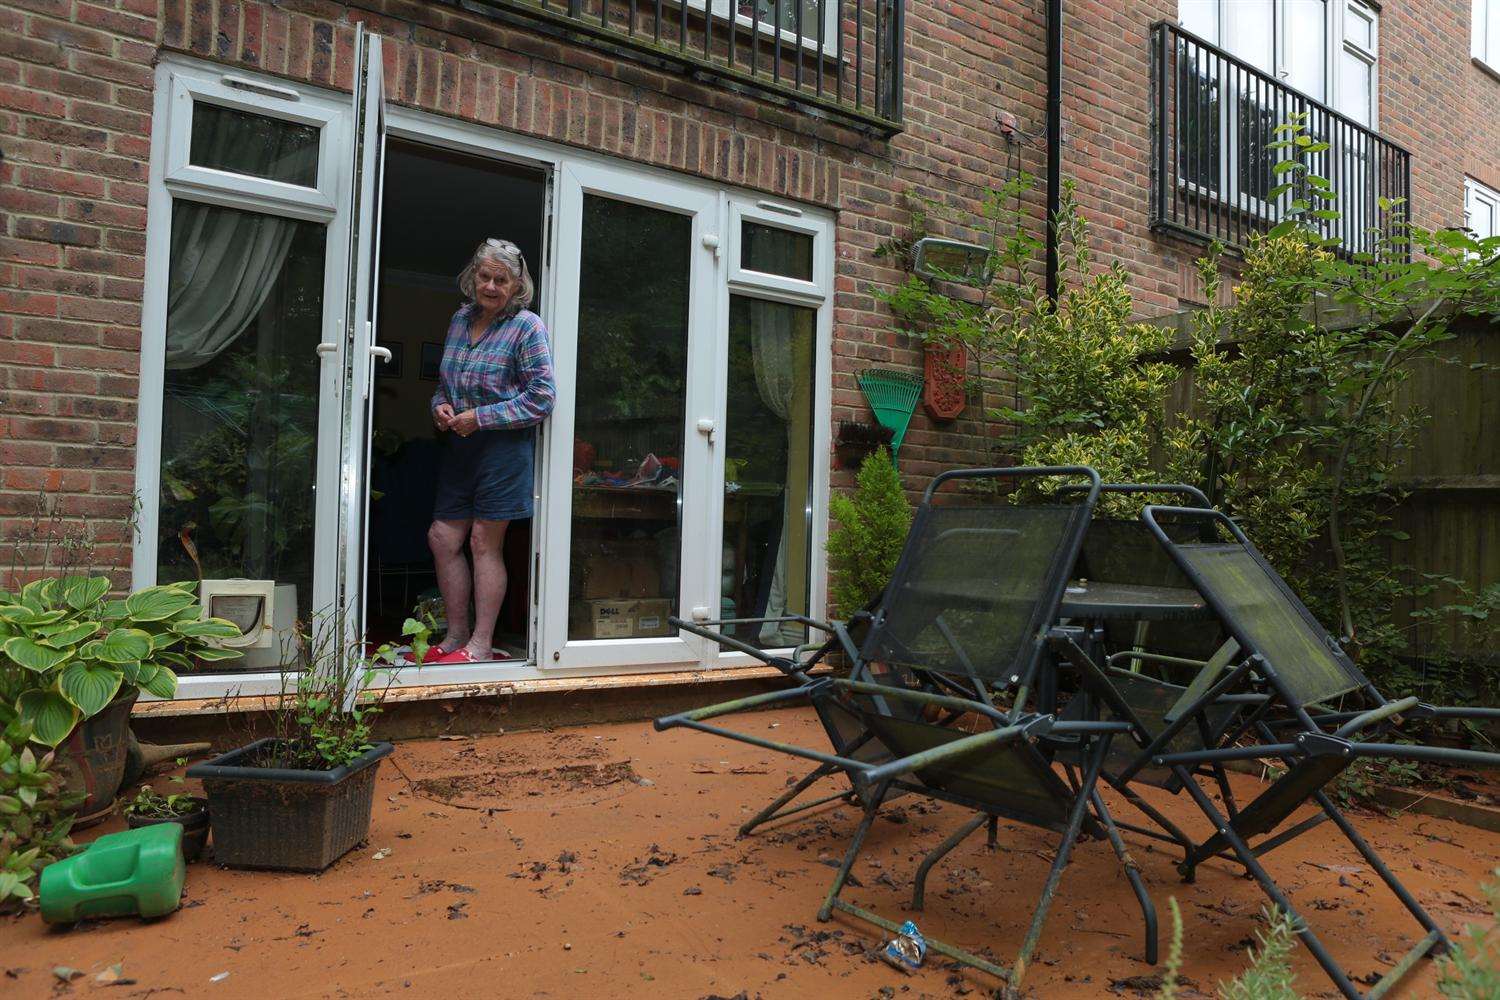 Rosabella Duffus has damage in her house after mud and clay flooded the area fom the building site up the road